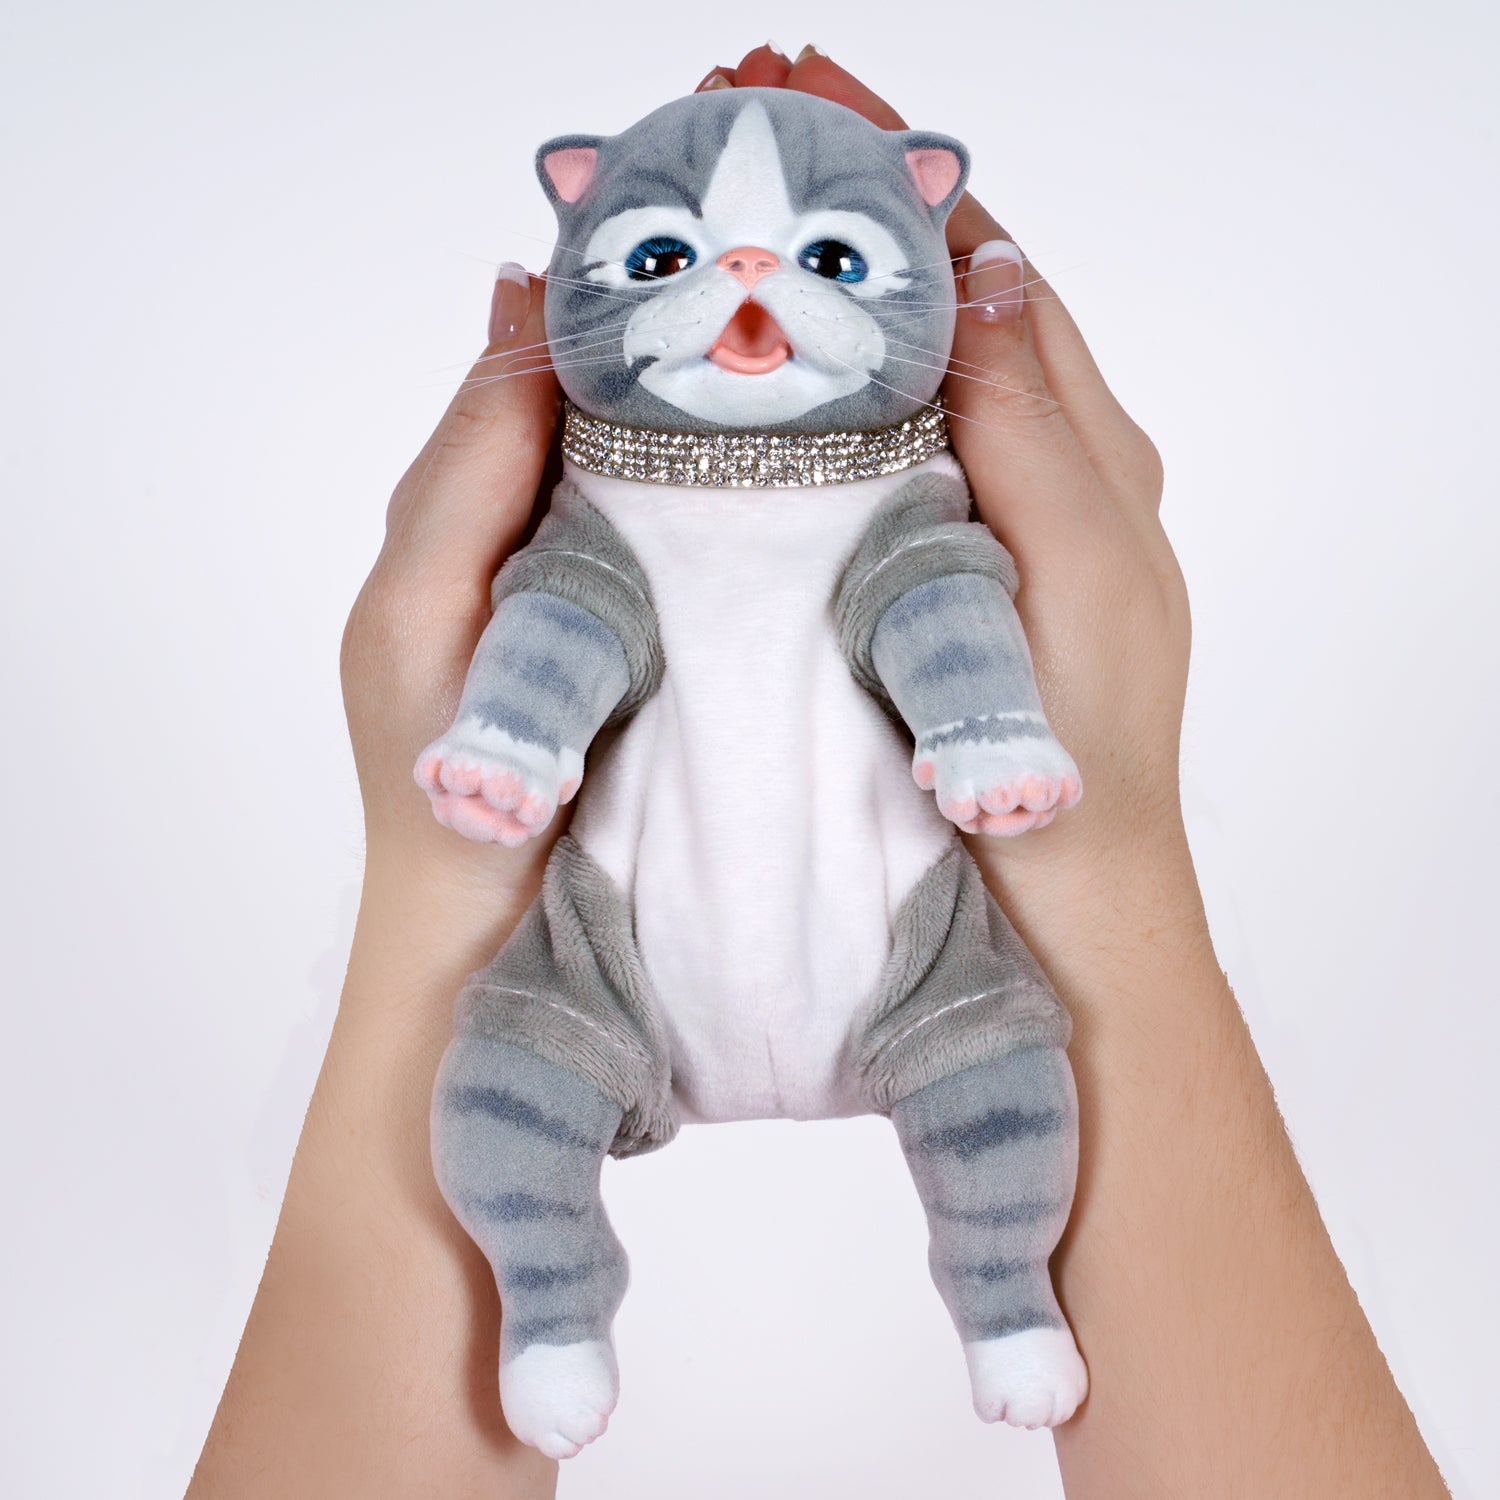 9-inch realistic Baby Tabby Kitten doll inspired by an American Shorthair kitten. Sculpted by world-renowned artist Ping Lau, the Furever Babies Kitten collection by PG is made from our premium vinyl that is flocked for a velvety finish and a weighted plush body for that wonderfully lifelike feel